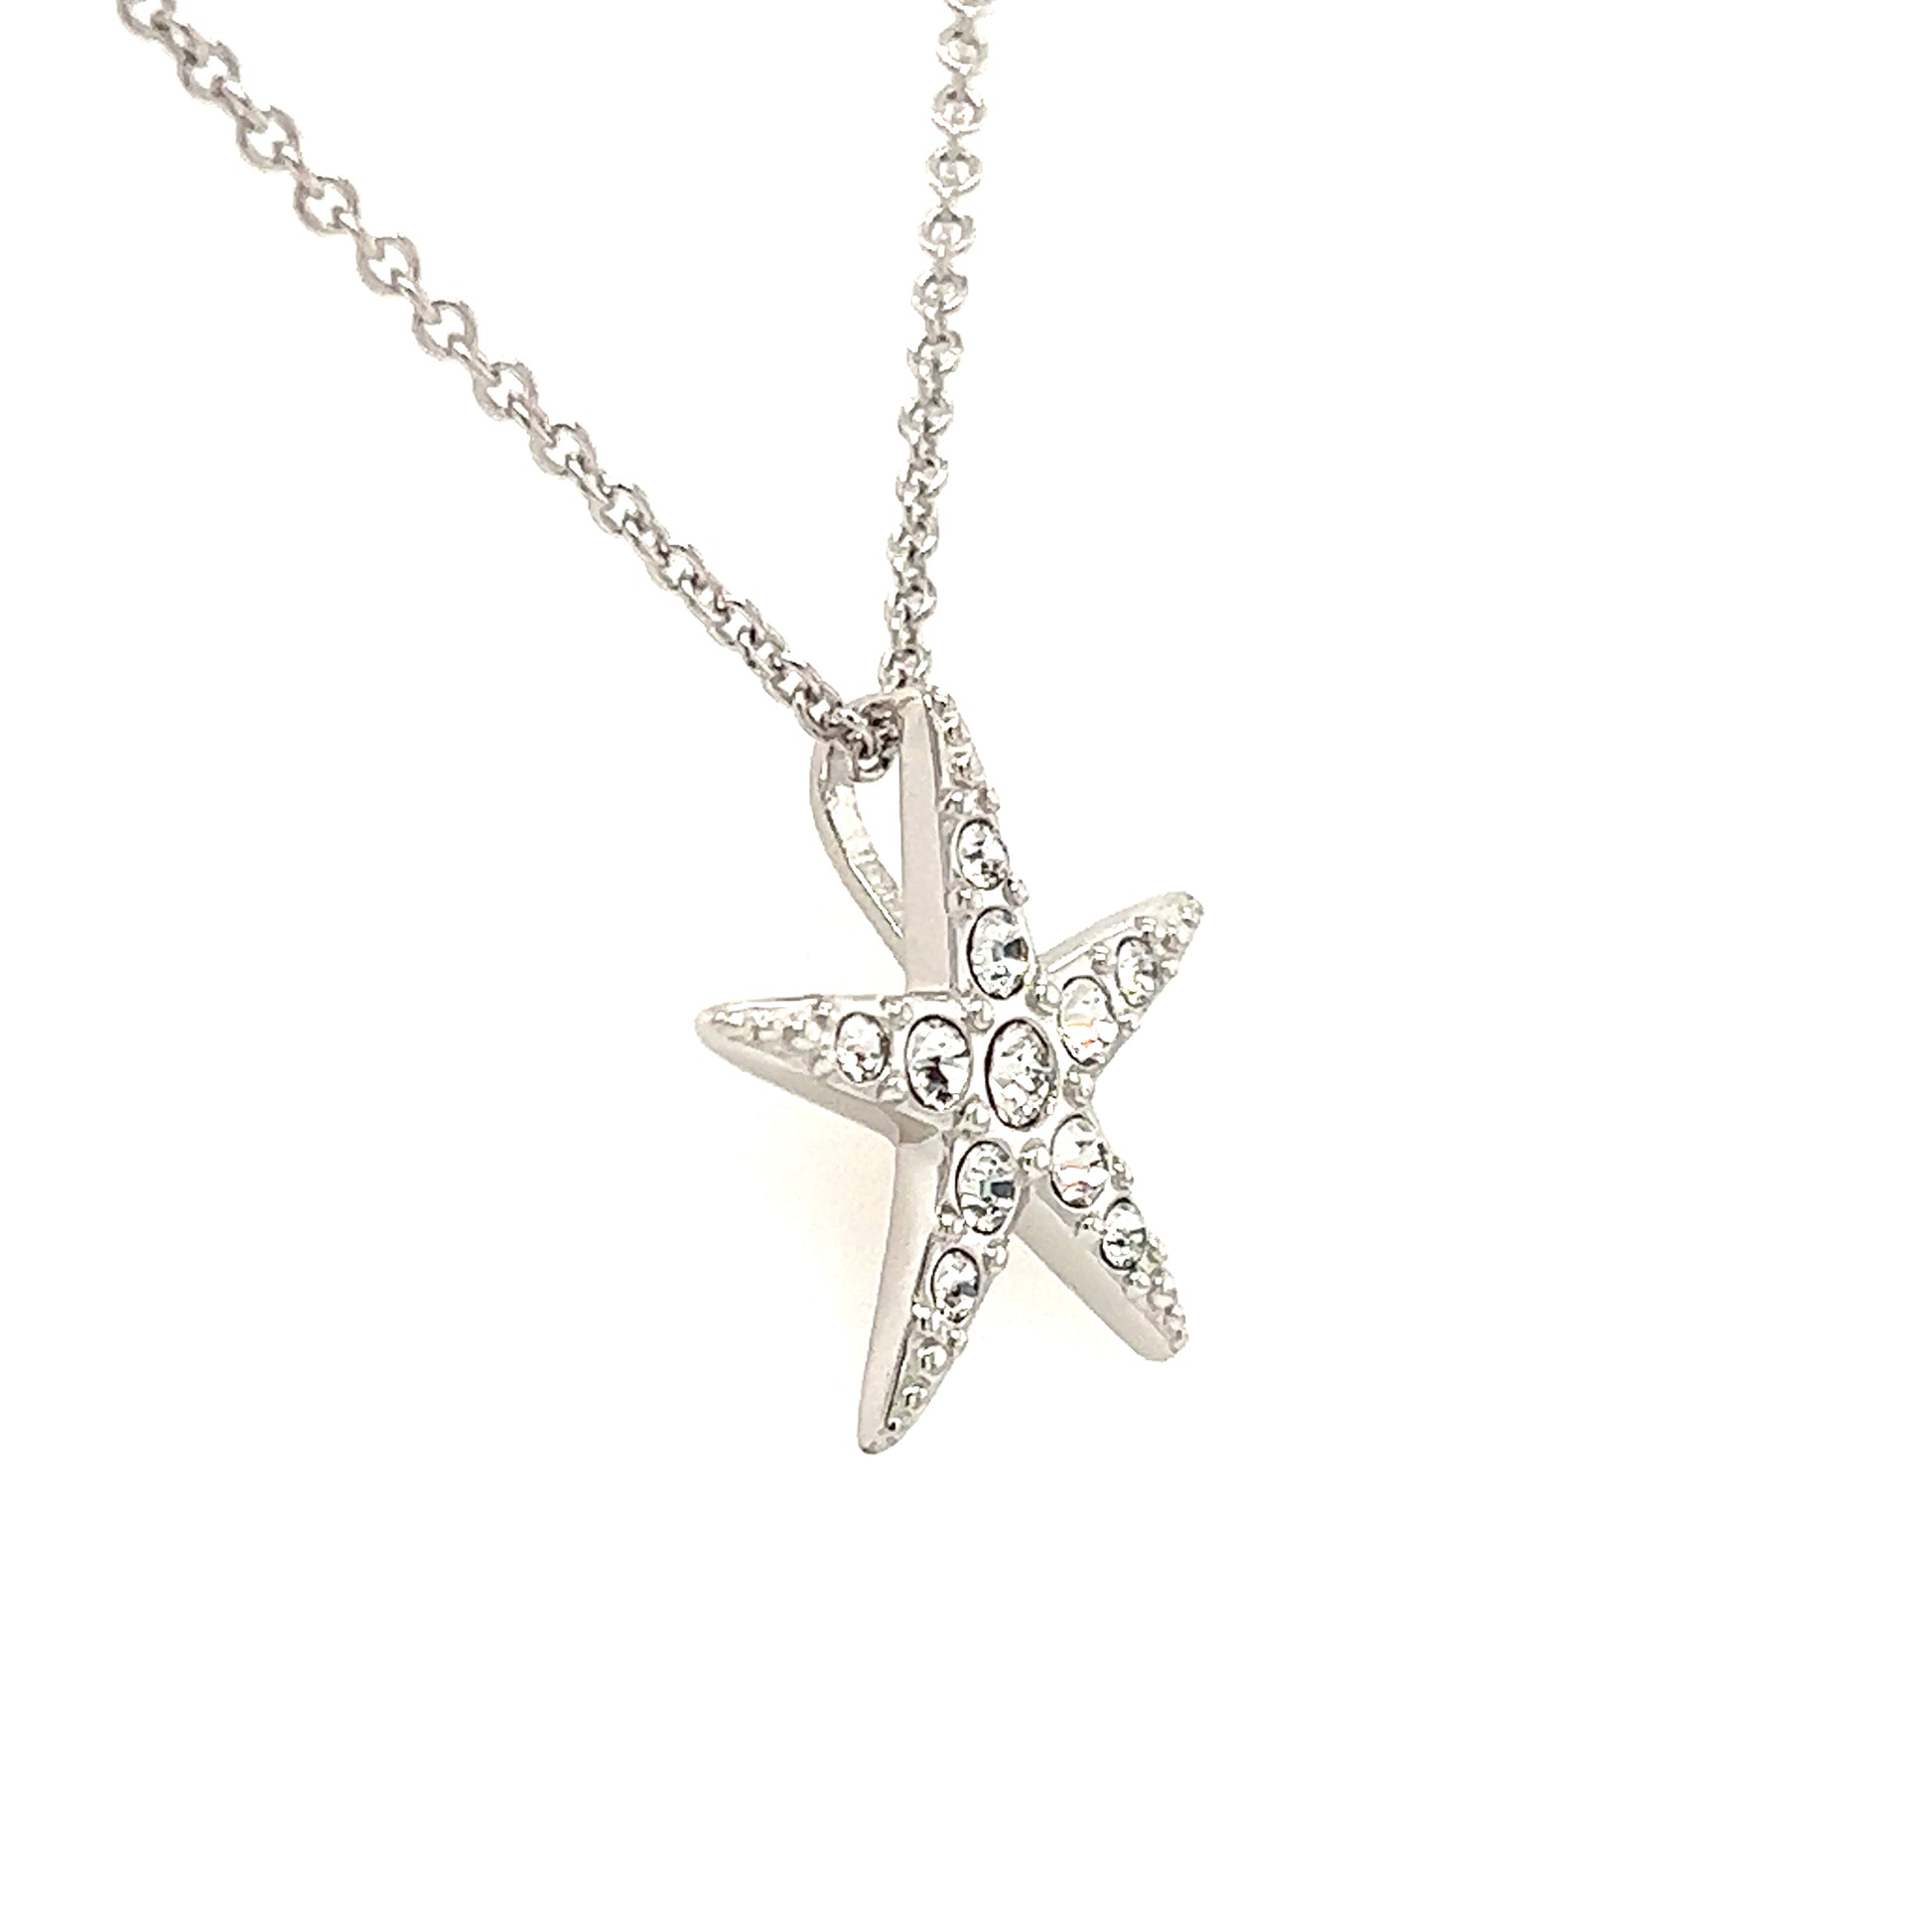 Small Starfish Necklace with White Crystals in Sterling Silver Right Side View